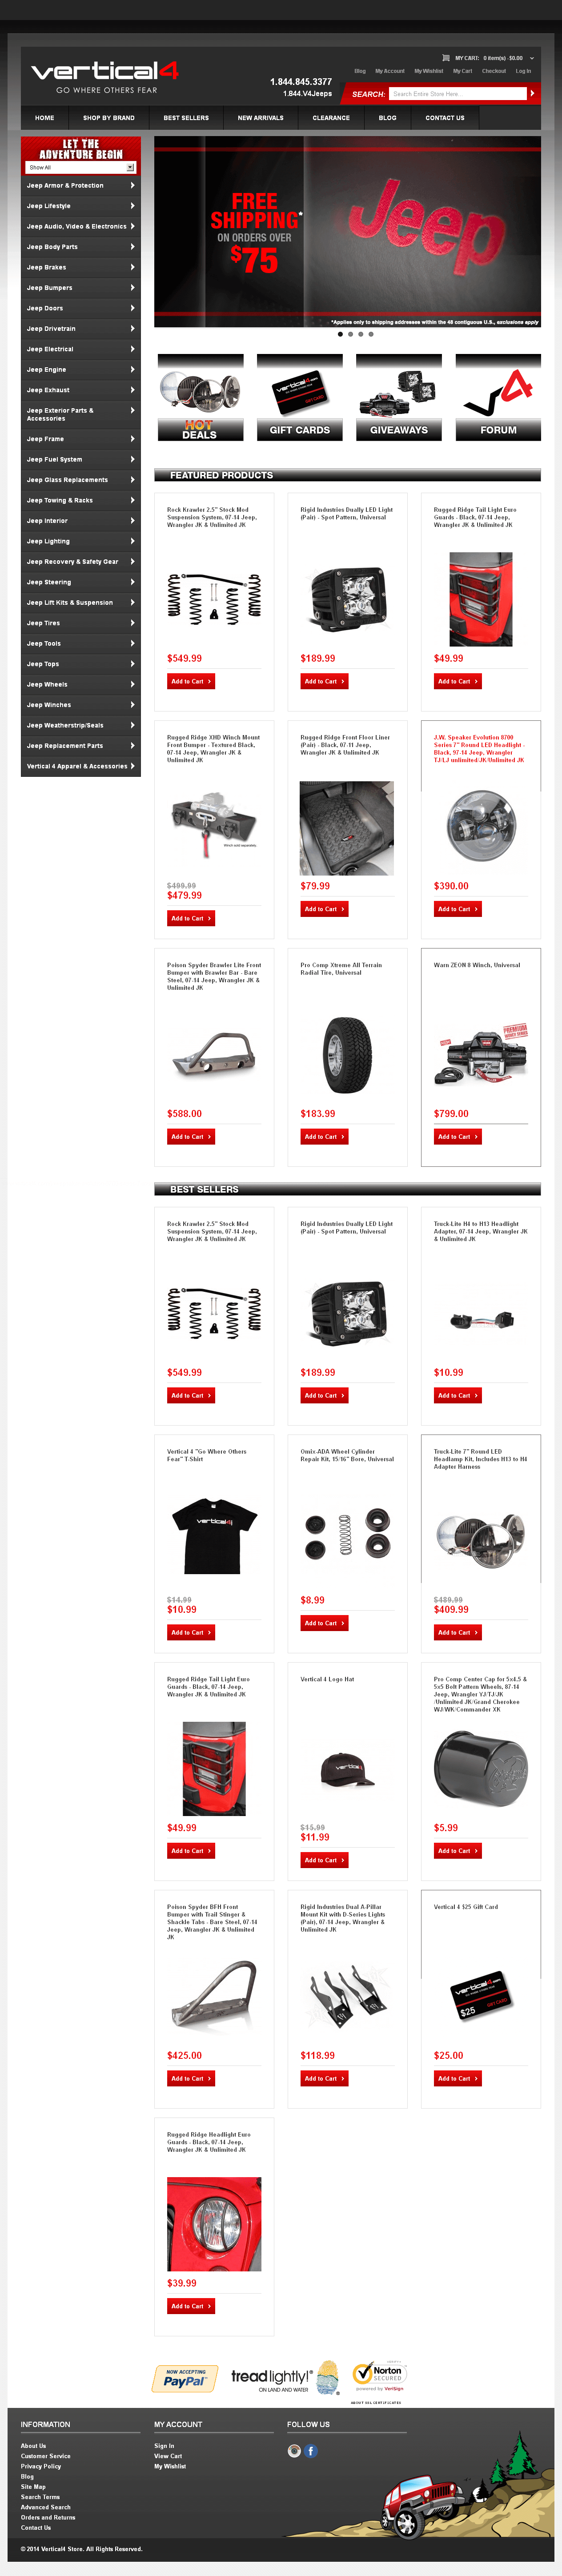  Verticle4 - A Magento Based eCommerce Site for Dealing in Vehicle Parts